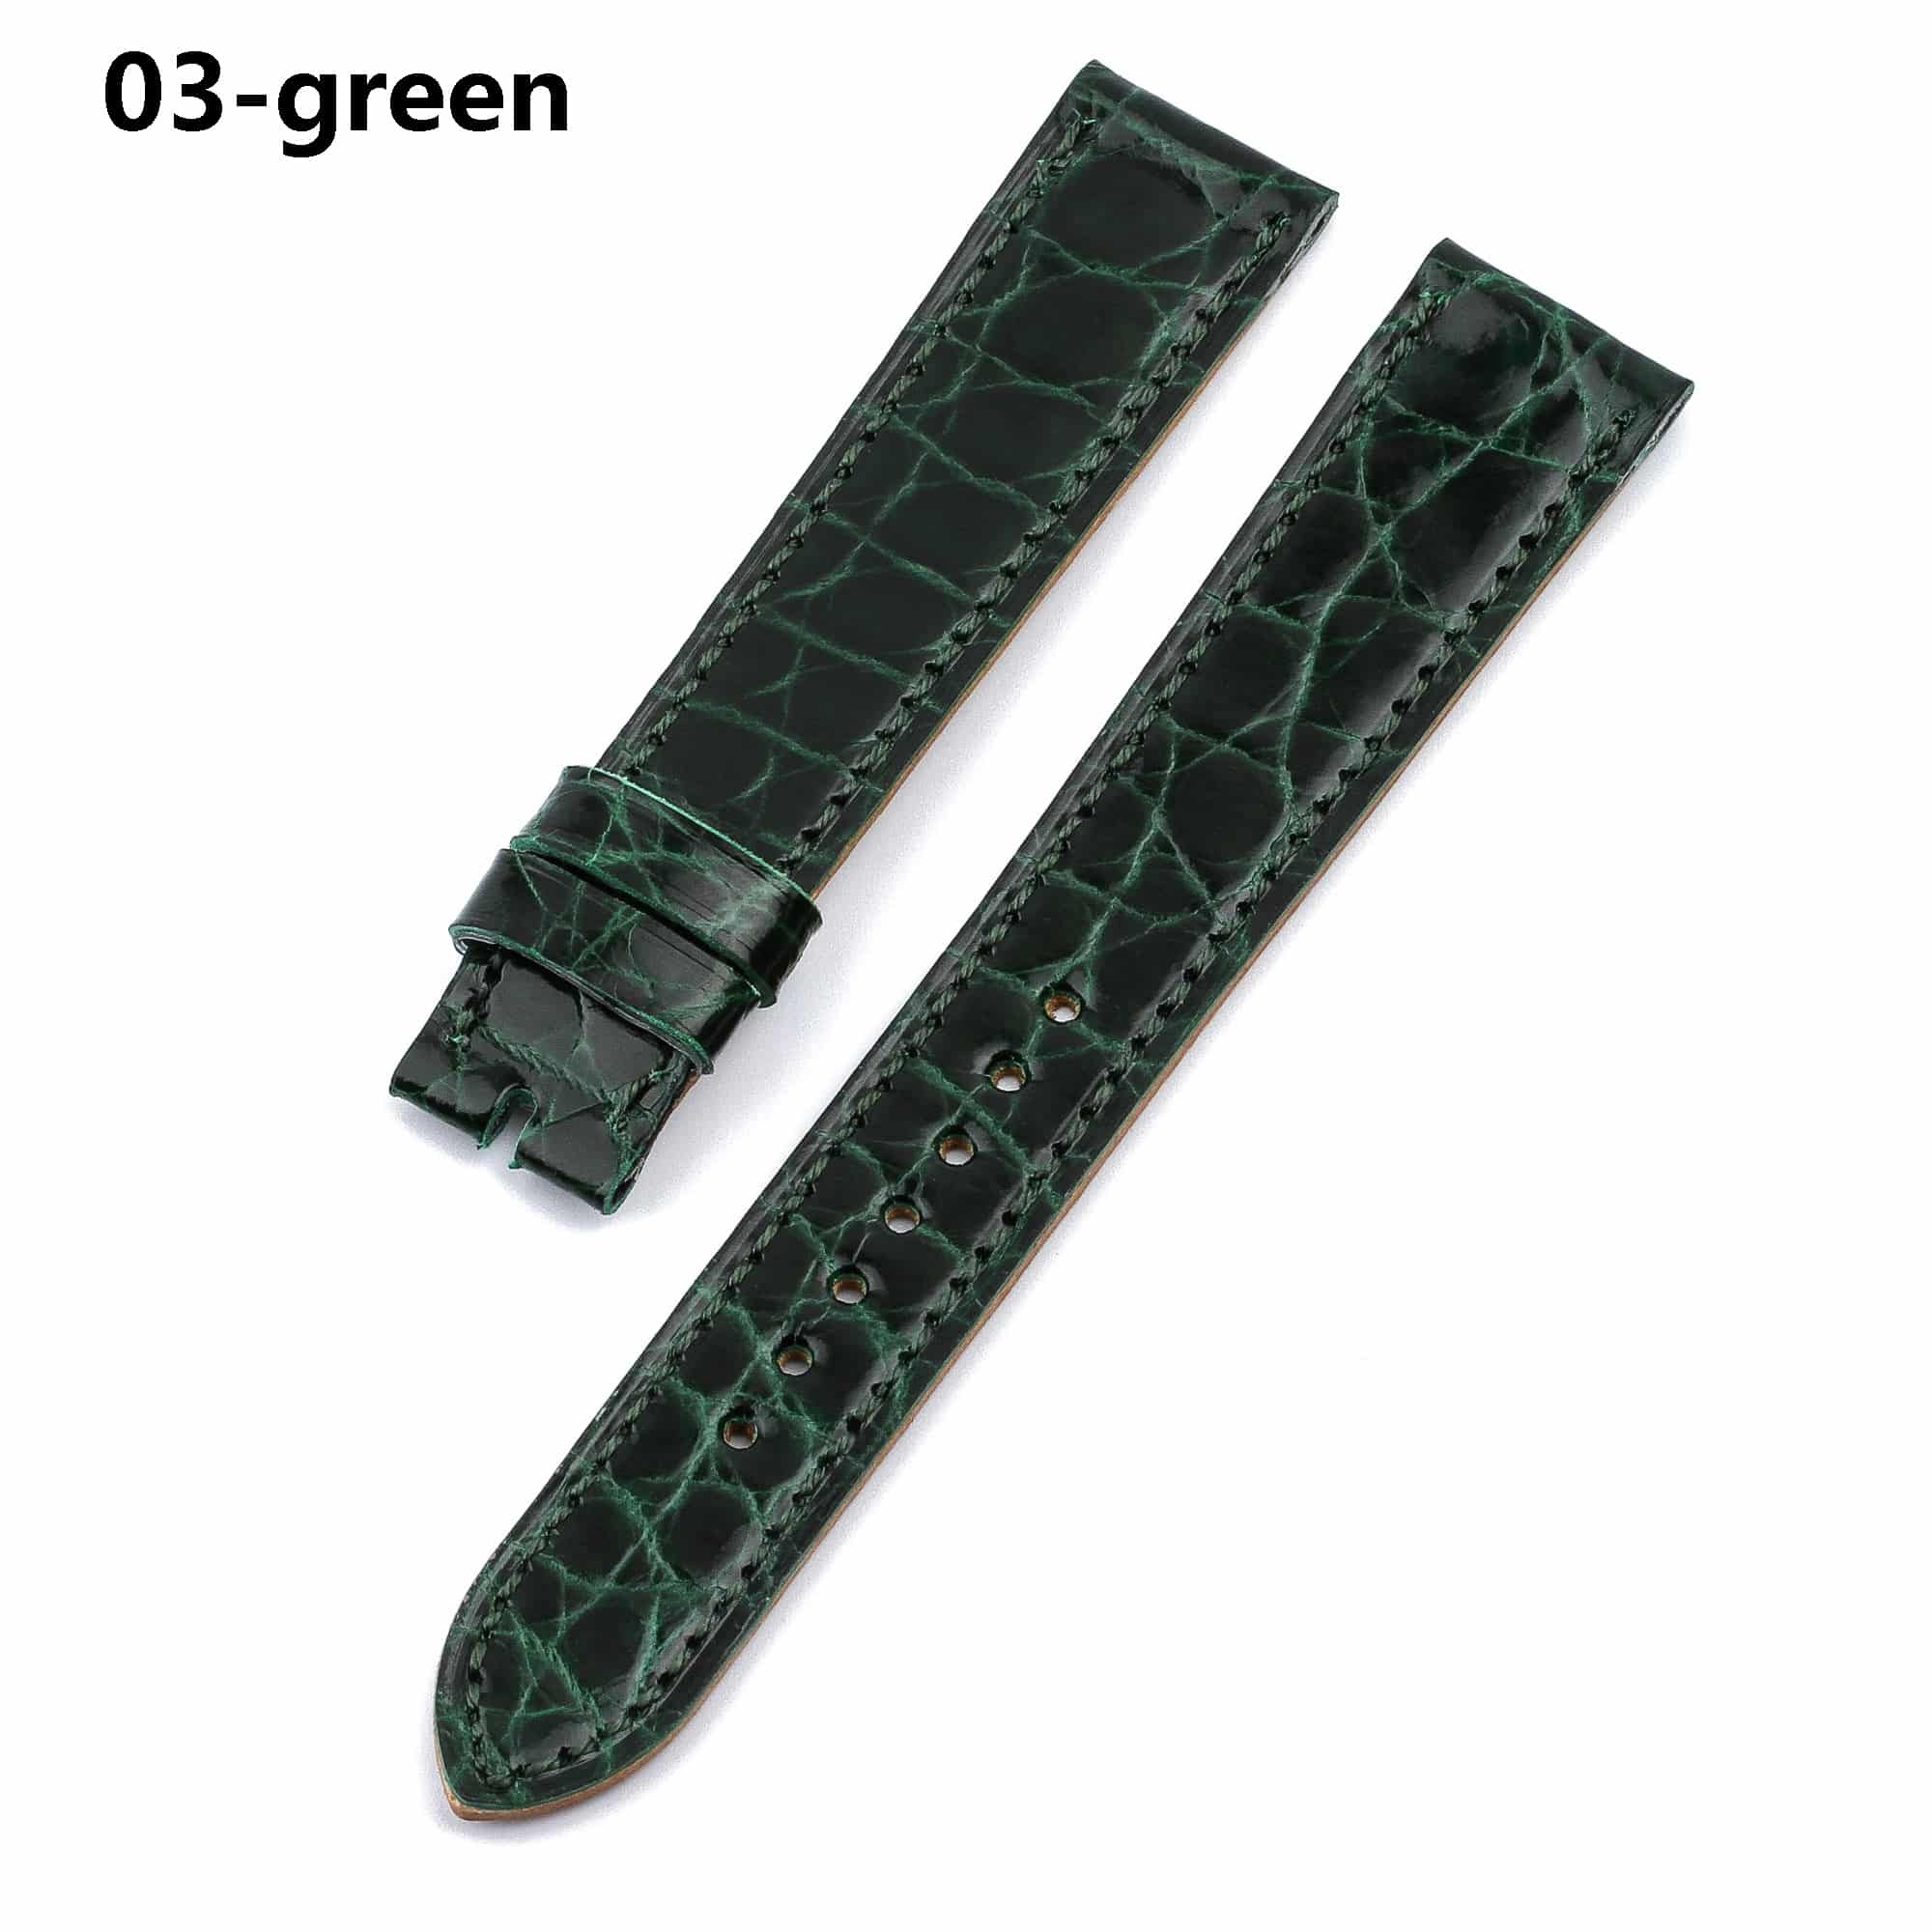 Alligator Hermes leather strap replacement Cape cod single tour green watch band